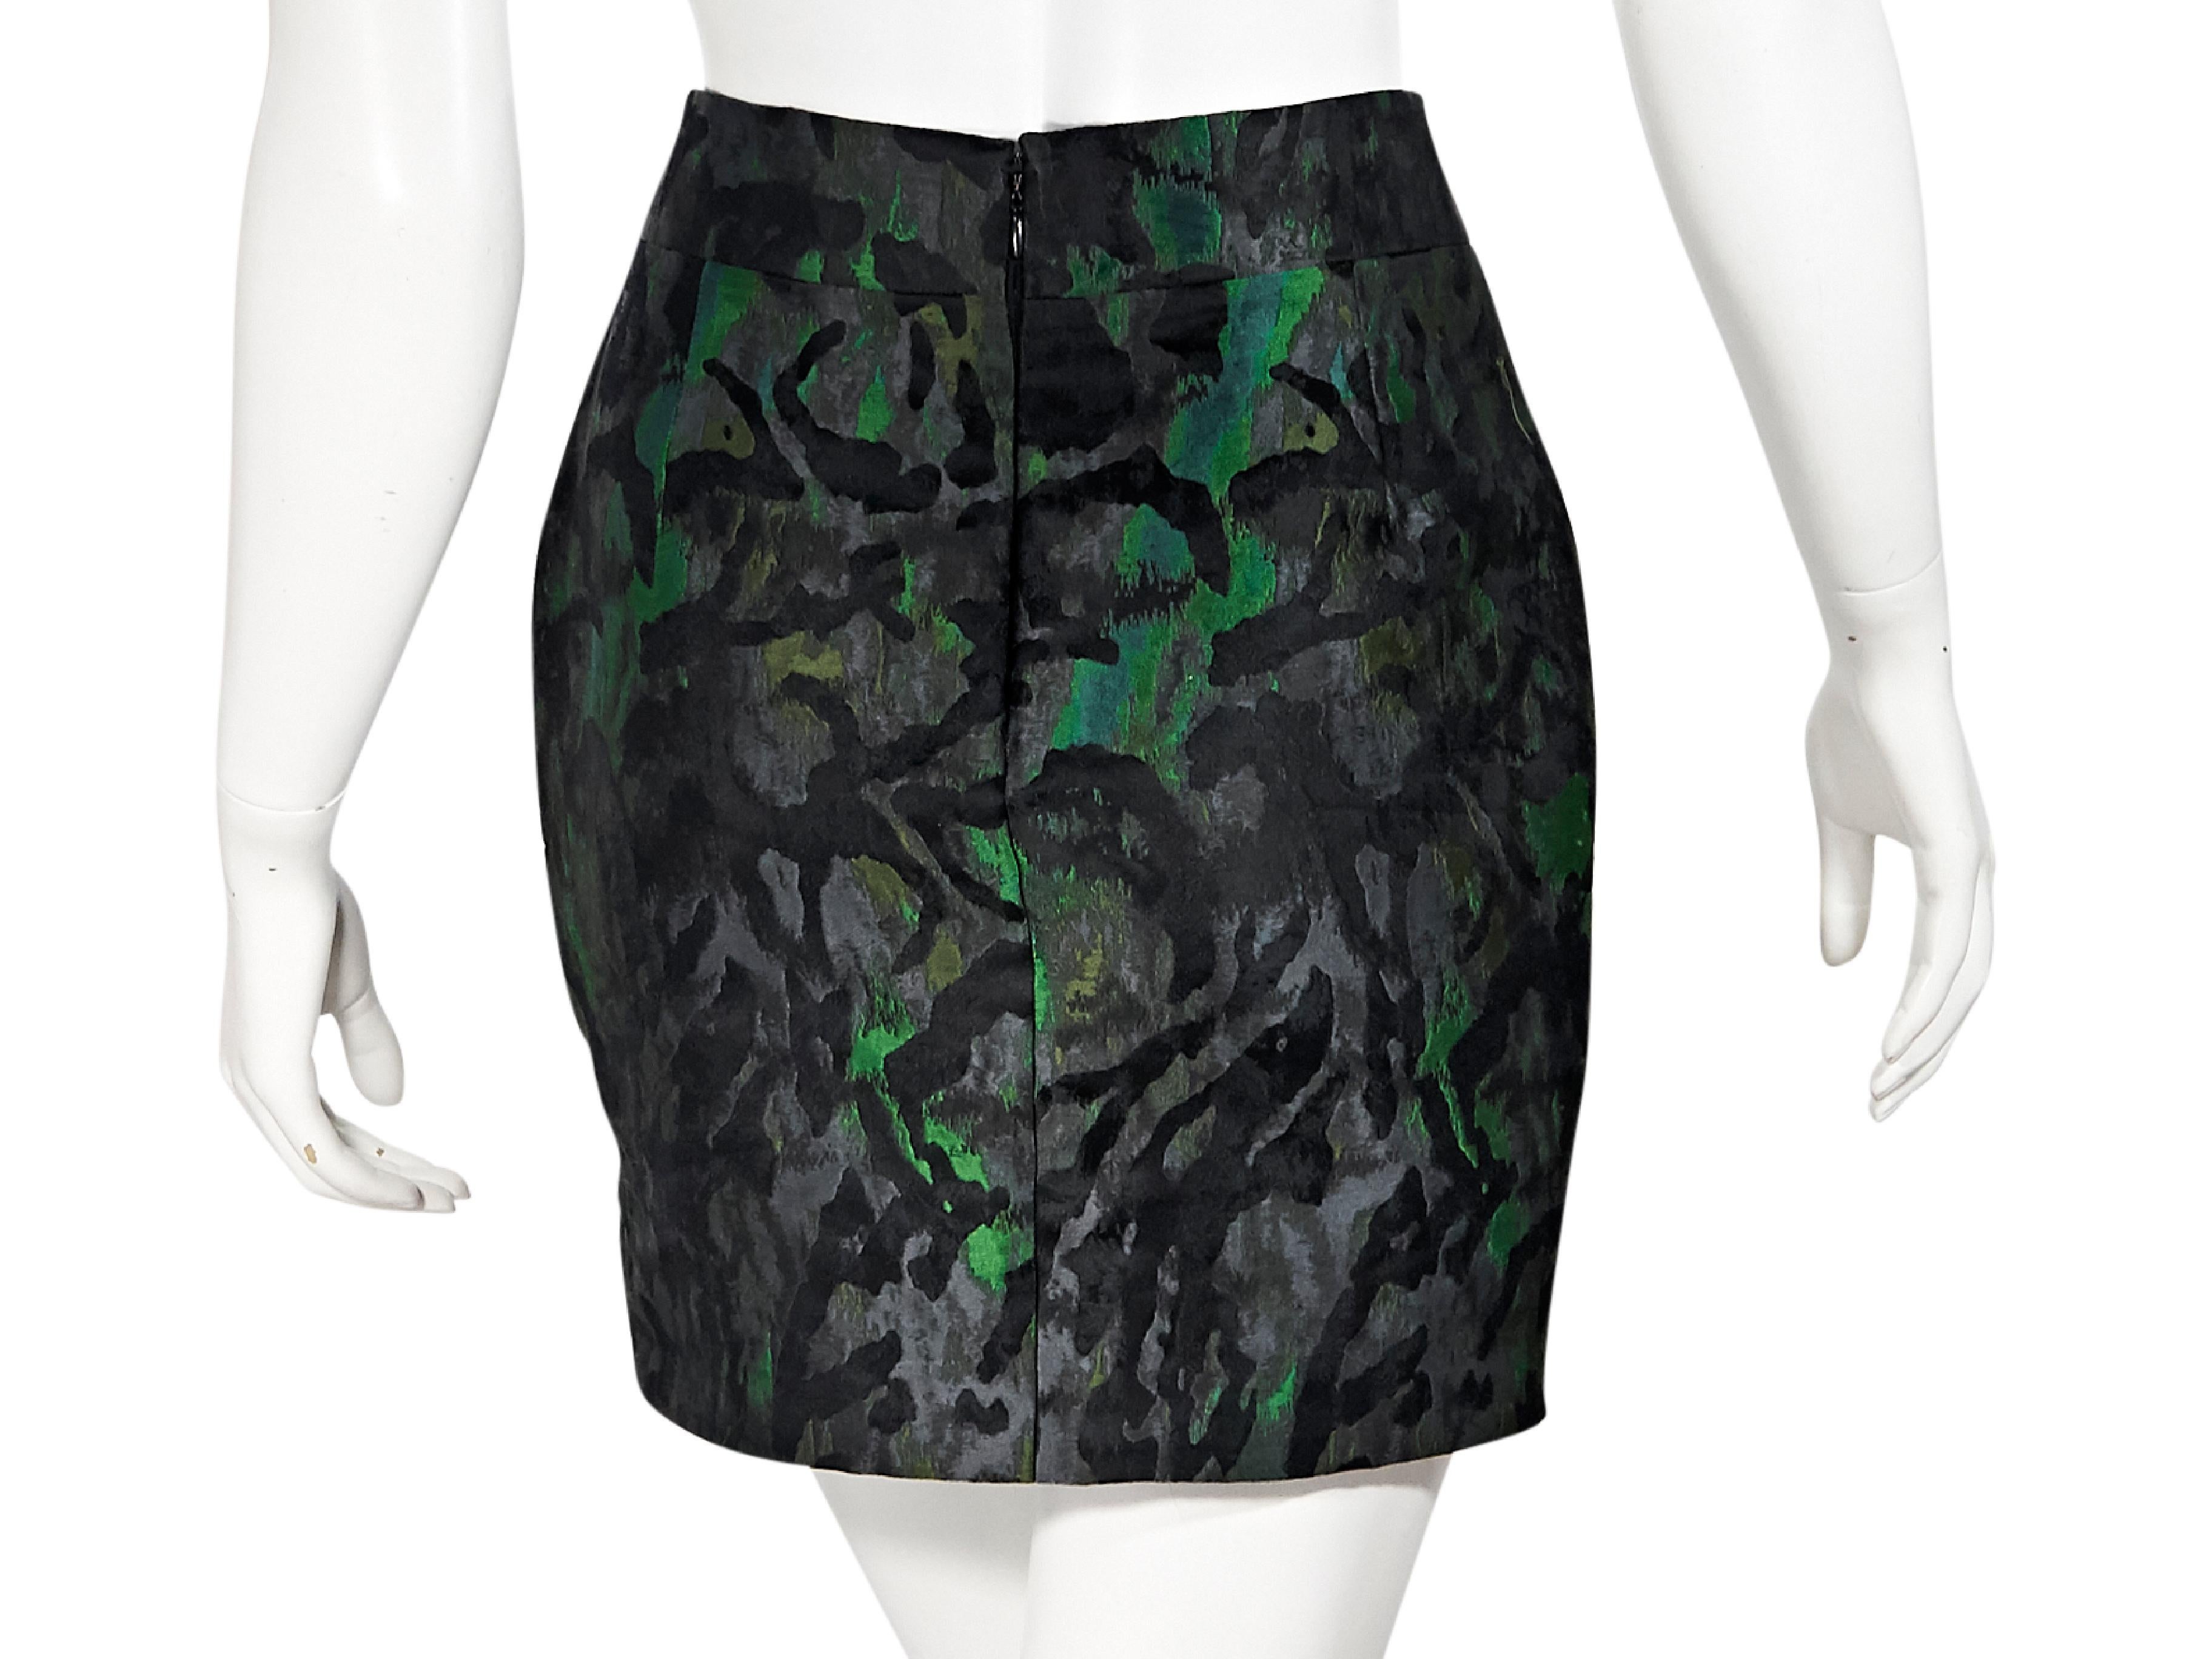 Product details:  Green and black mini skirt by Tom Ford.  Banded waist.  Concealed back zip closure.  27.5